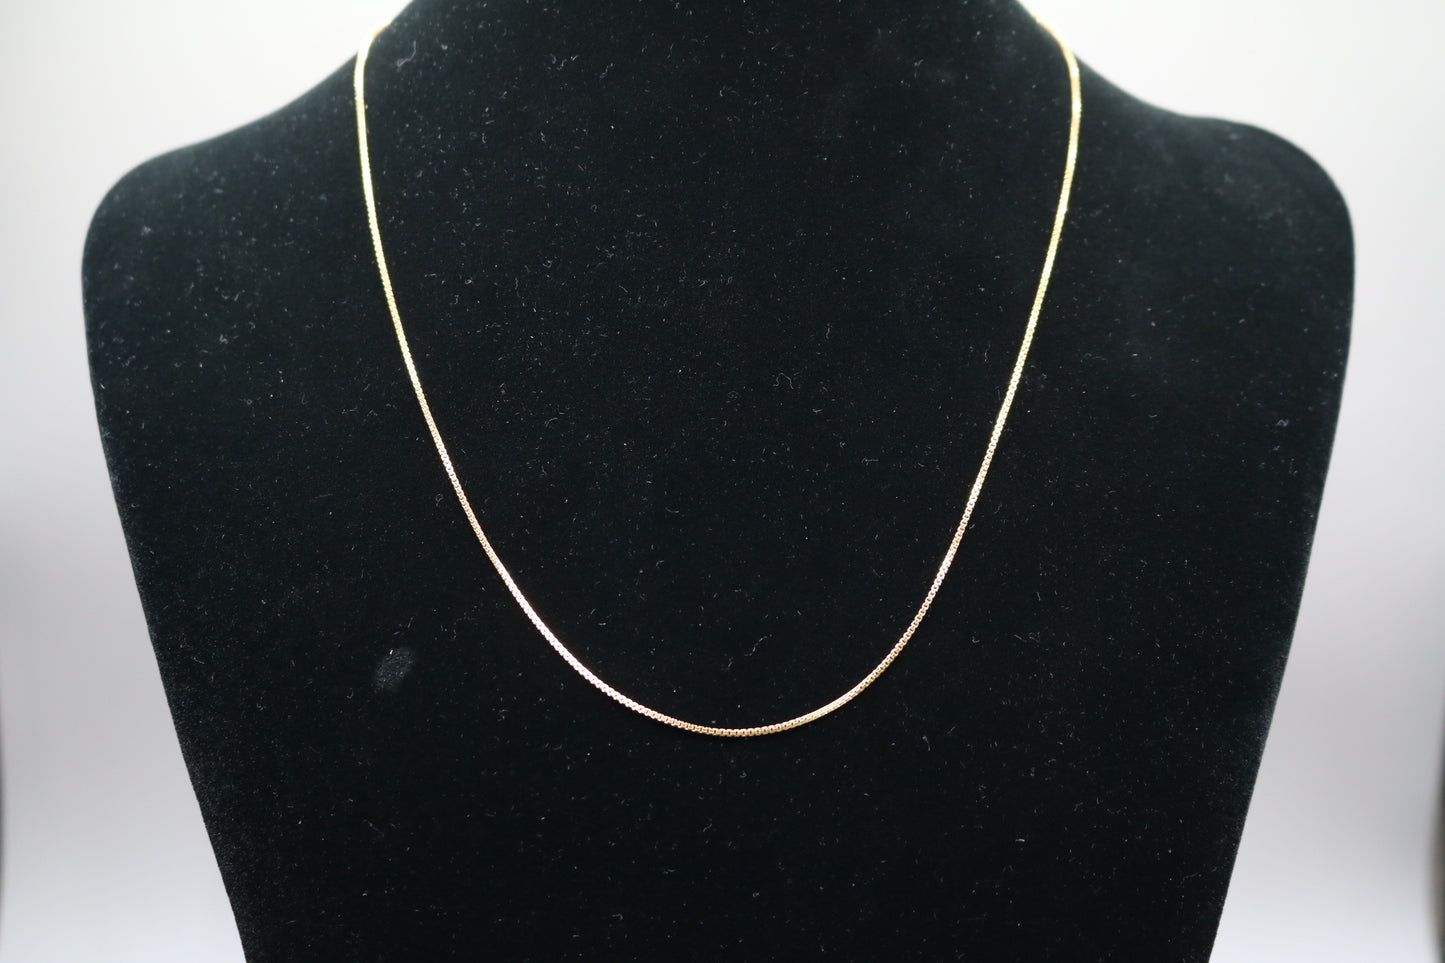 18K Yellow Gold Box Chain (18 inches)